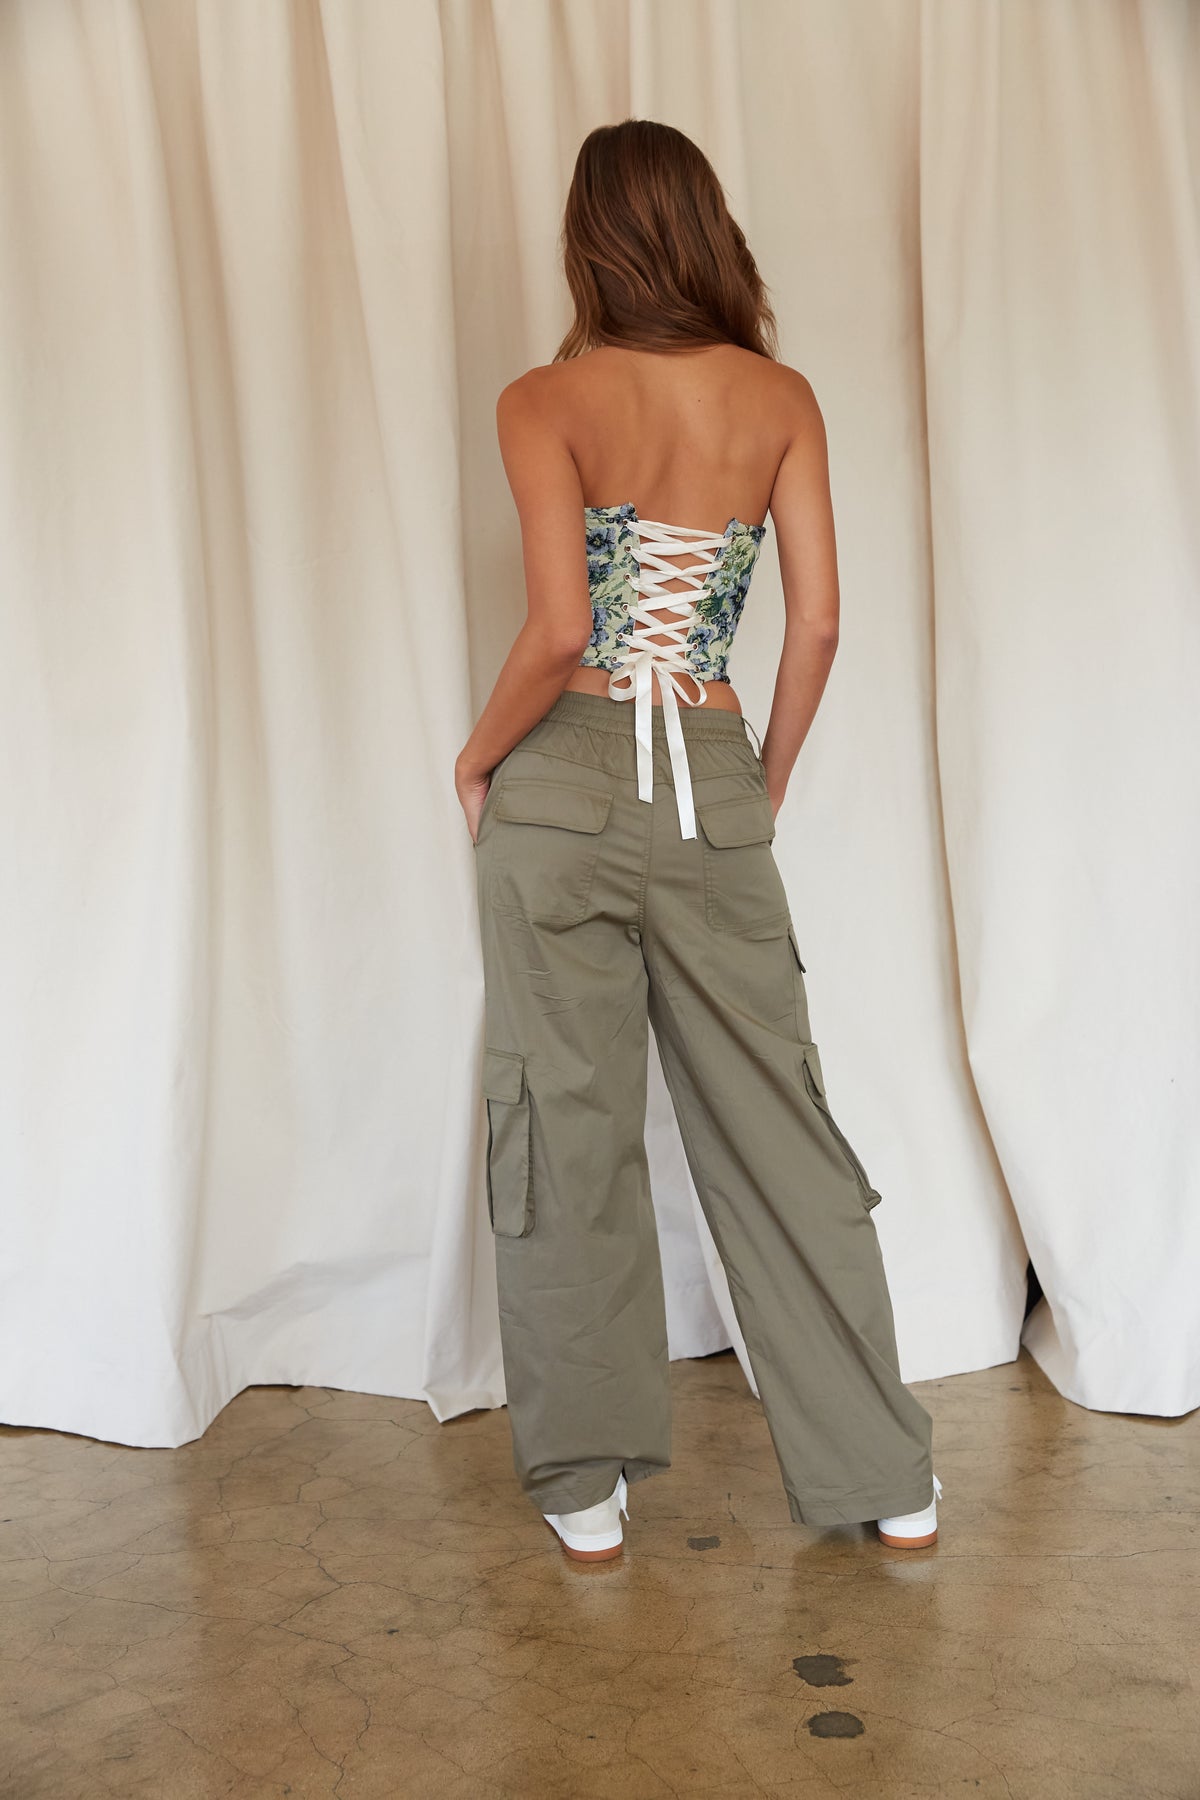 how to wear baggy cargo pants - cargo pants outfit - corset top and cargo streetwear look